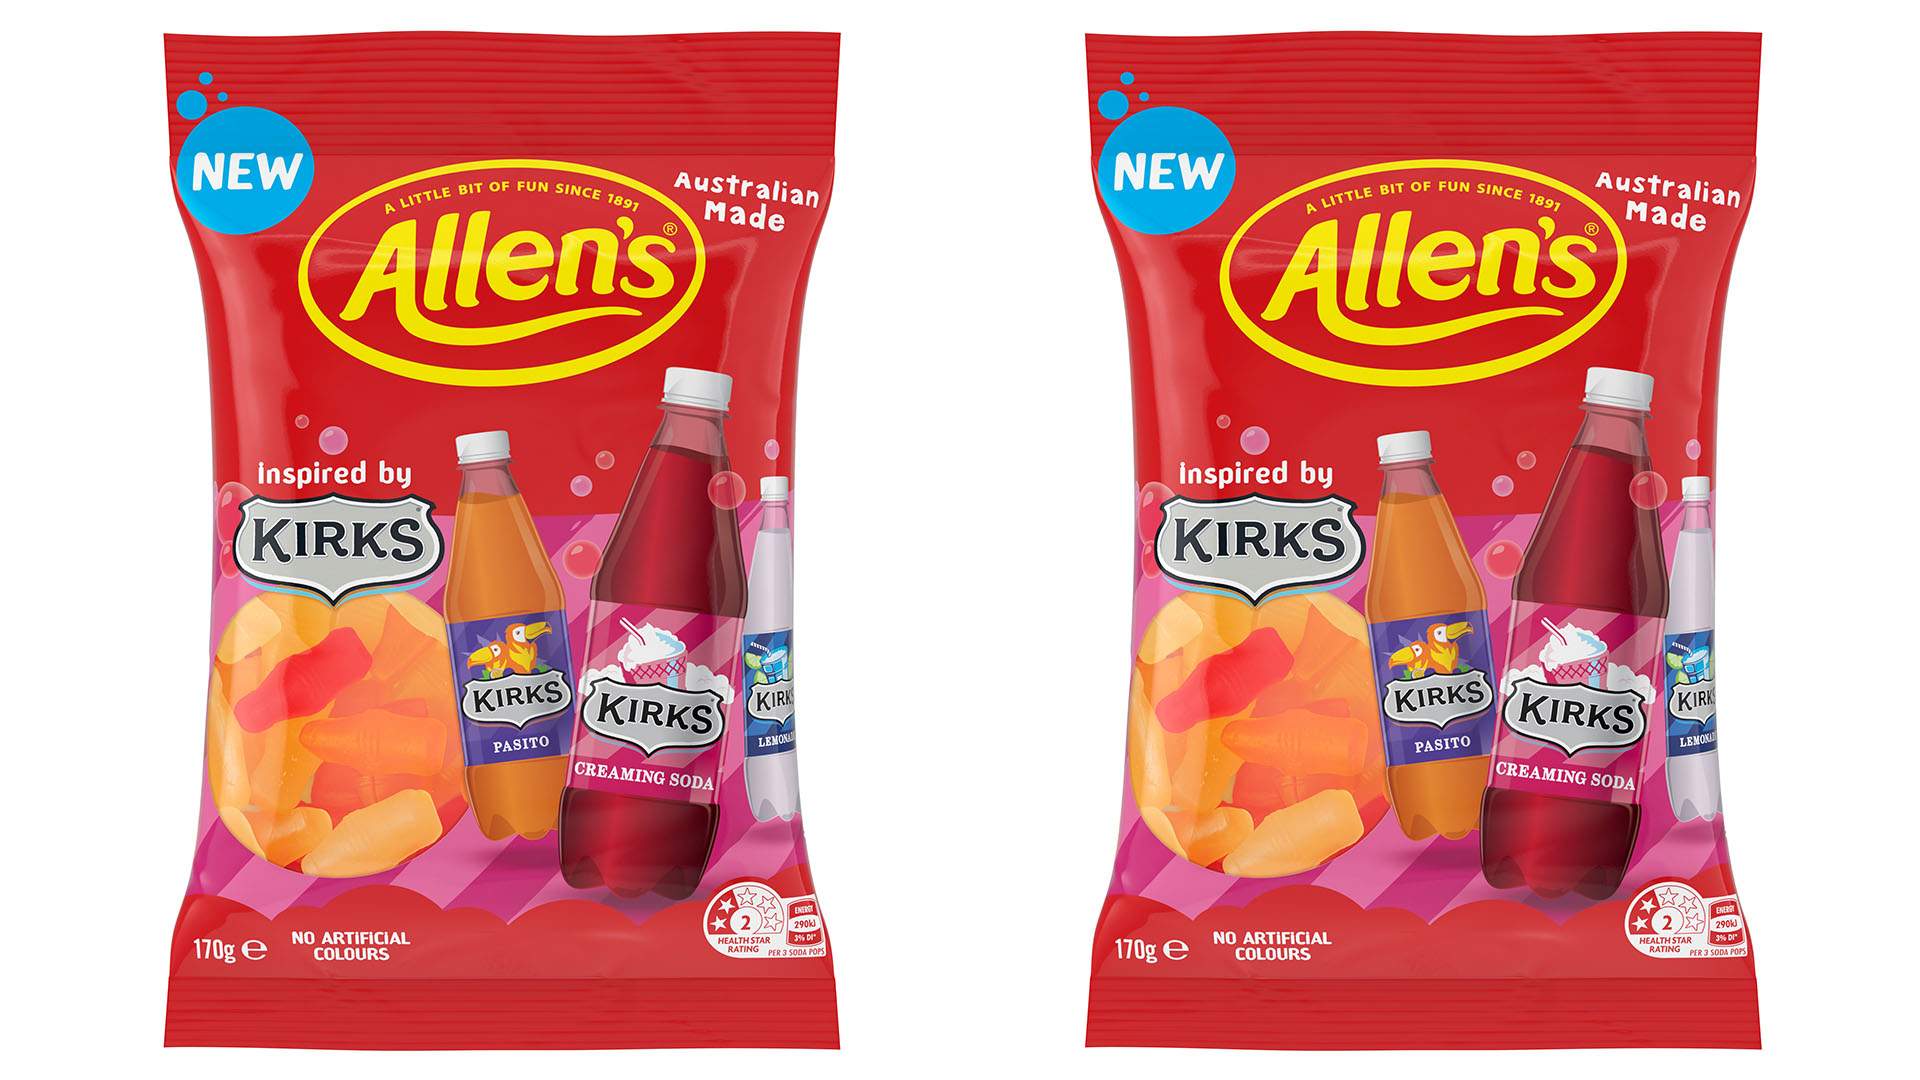 Allen's Is Turning Kirks' Classic Pasito, Creaming Soda and Lemonade Soft Drinks Into Lollies